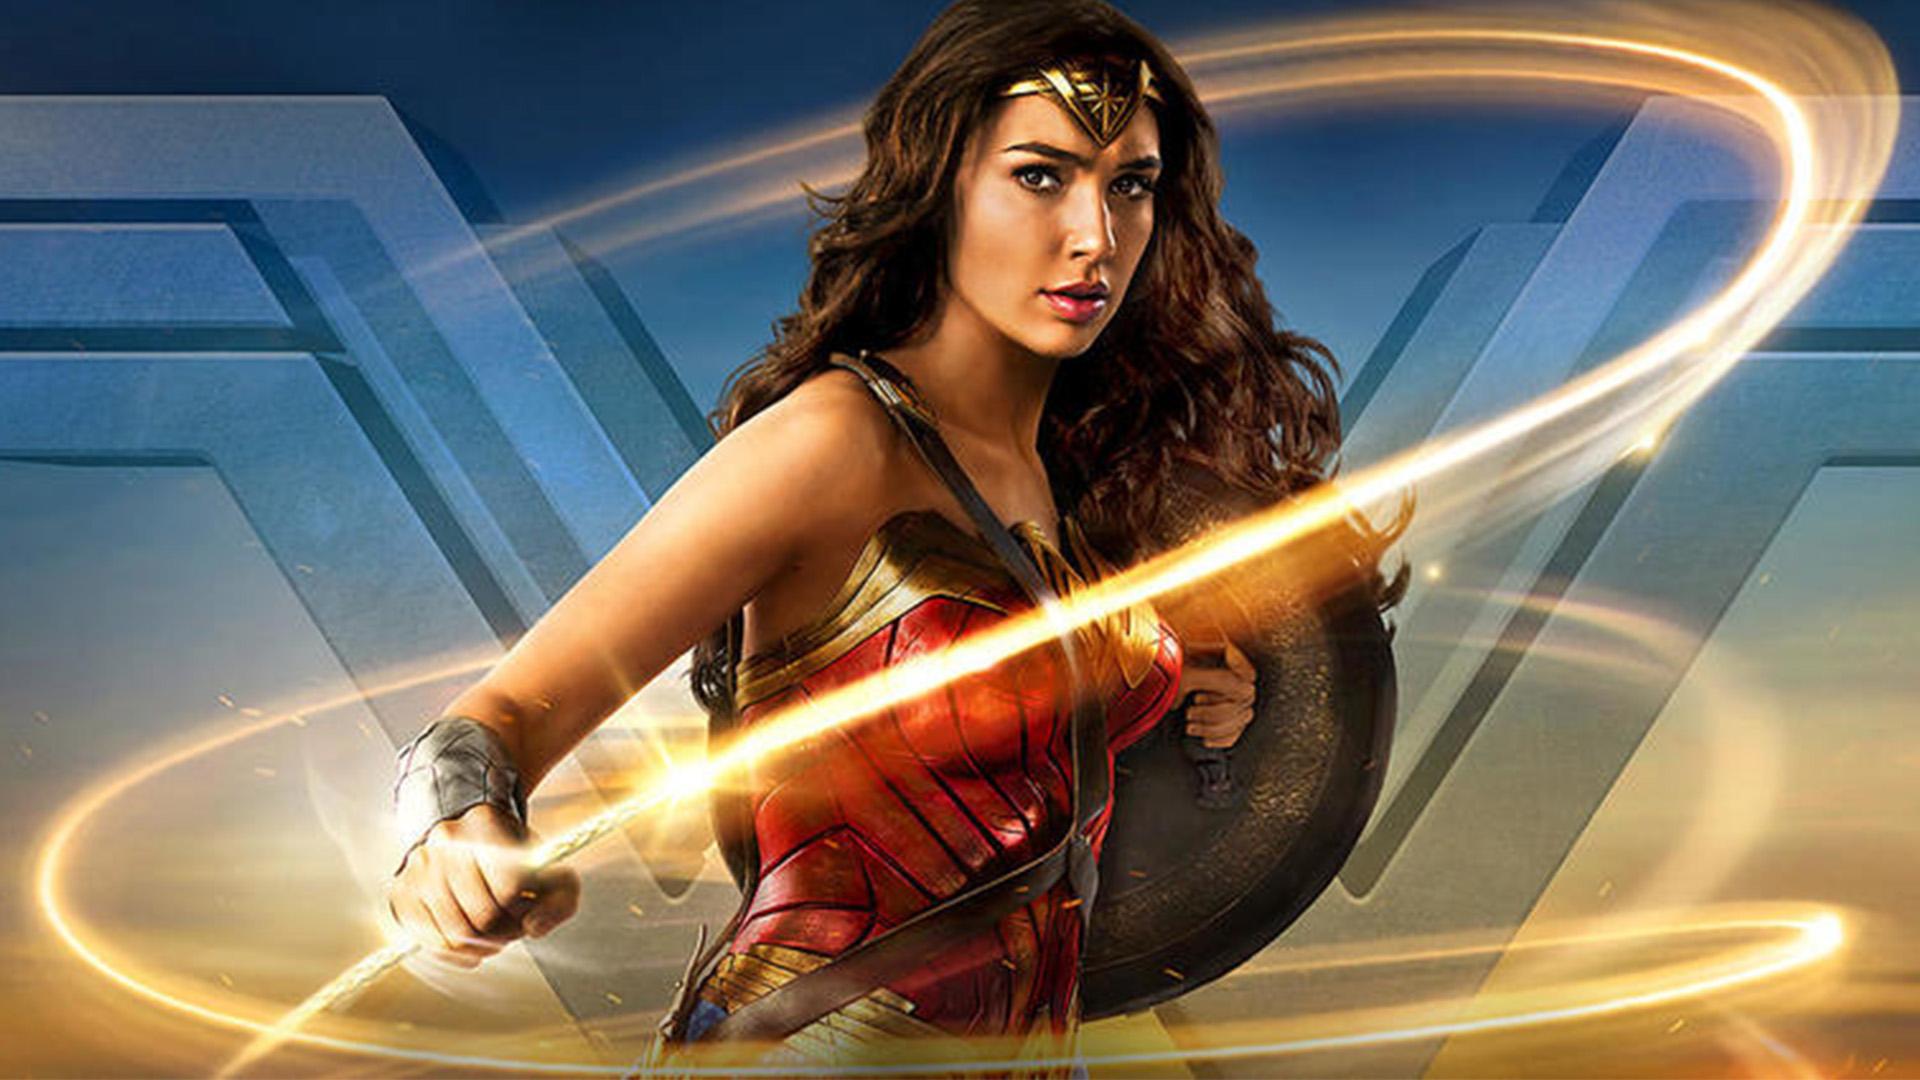 RUMOR: Wonder Woman 2 Early Ideas Reveal Diana Uses Lasso To Fly